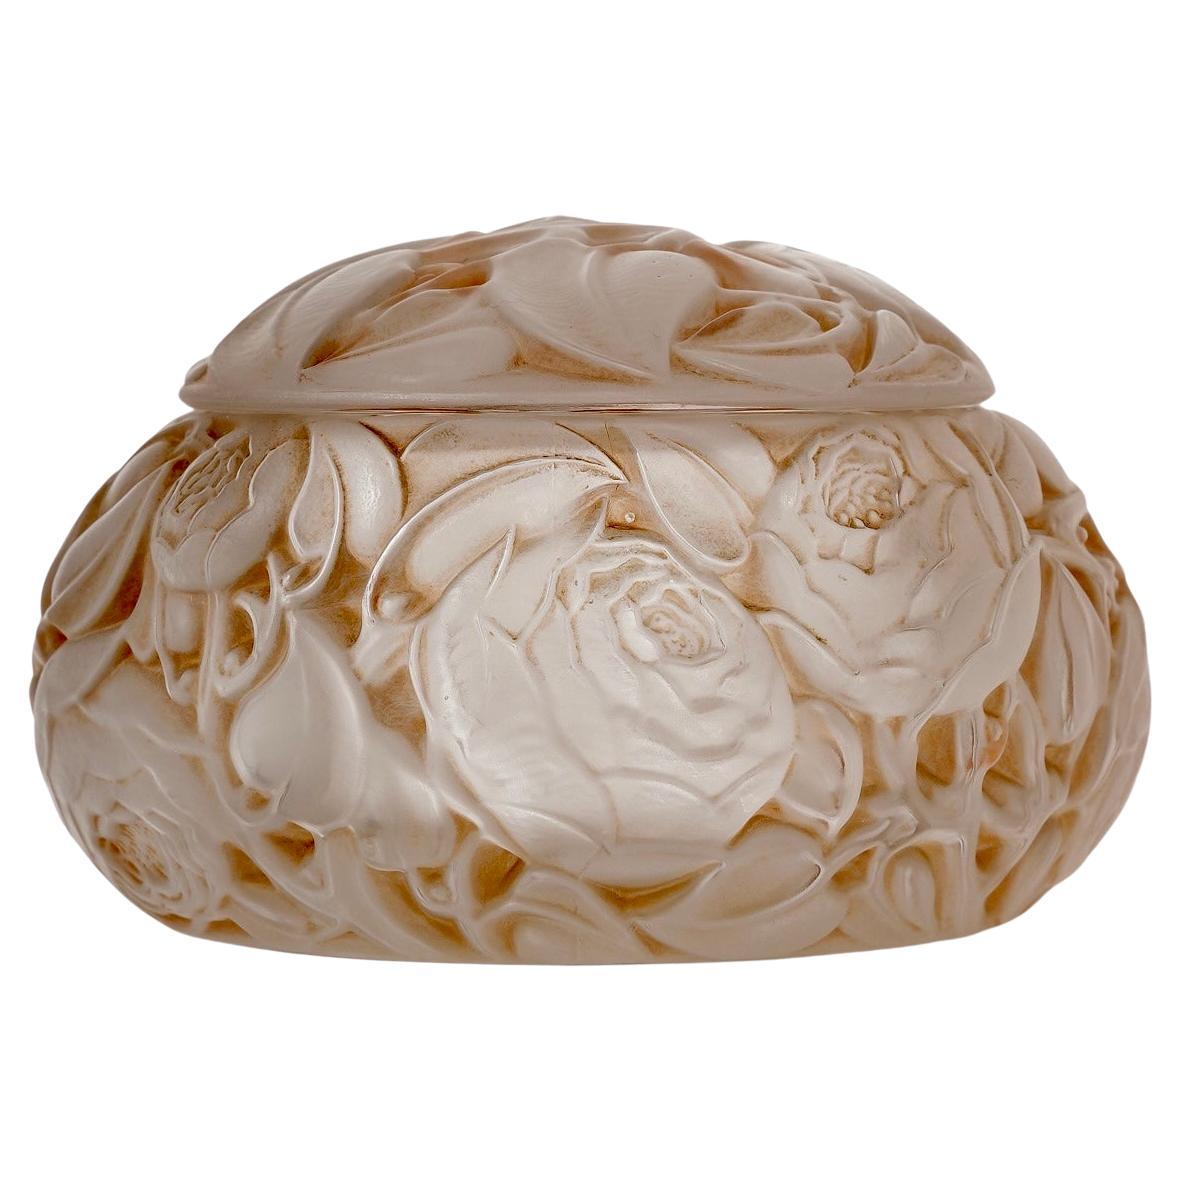 1927 René Lalique Box Dinard Frosted Glass with Sepia Patina, Roses Flowers